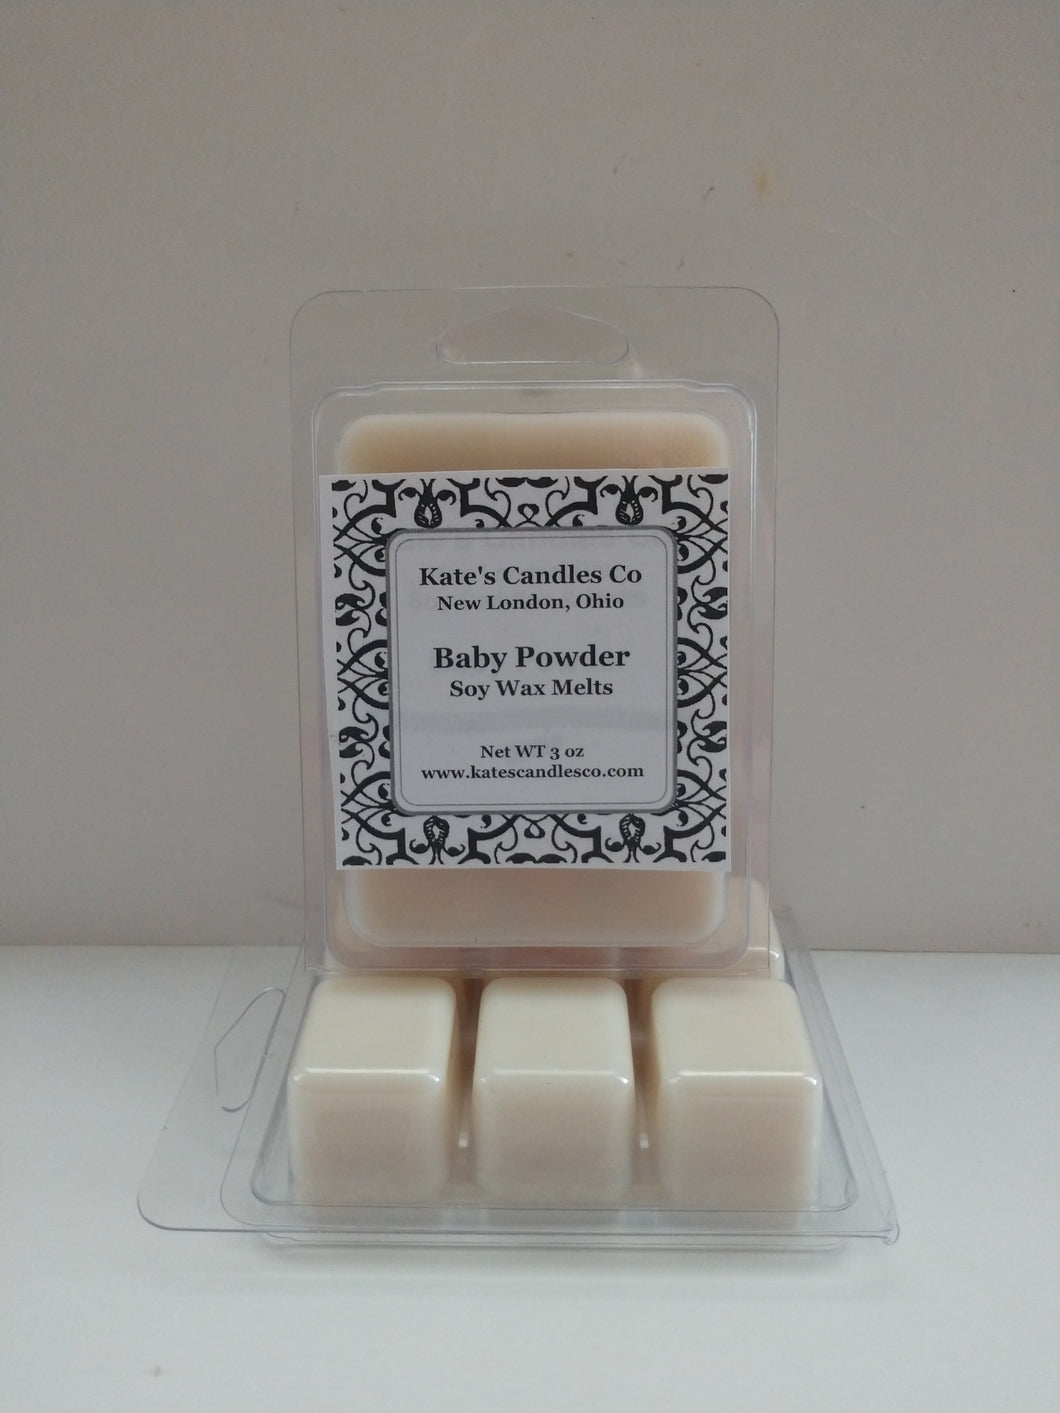 Baby Powder Soy Wax Melts - Kate's Candles Co. Soy Candles